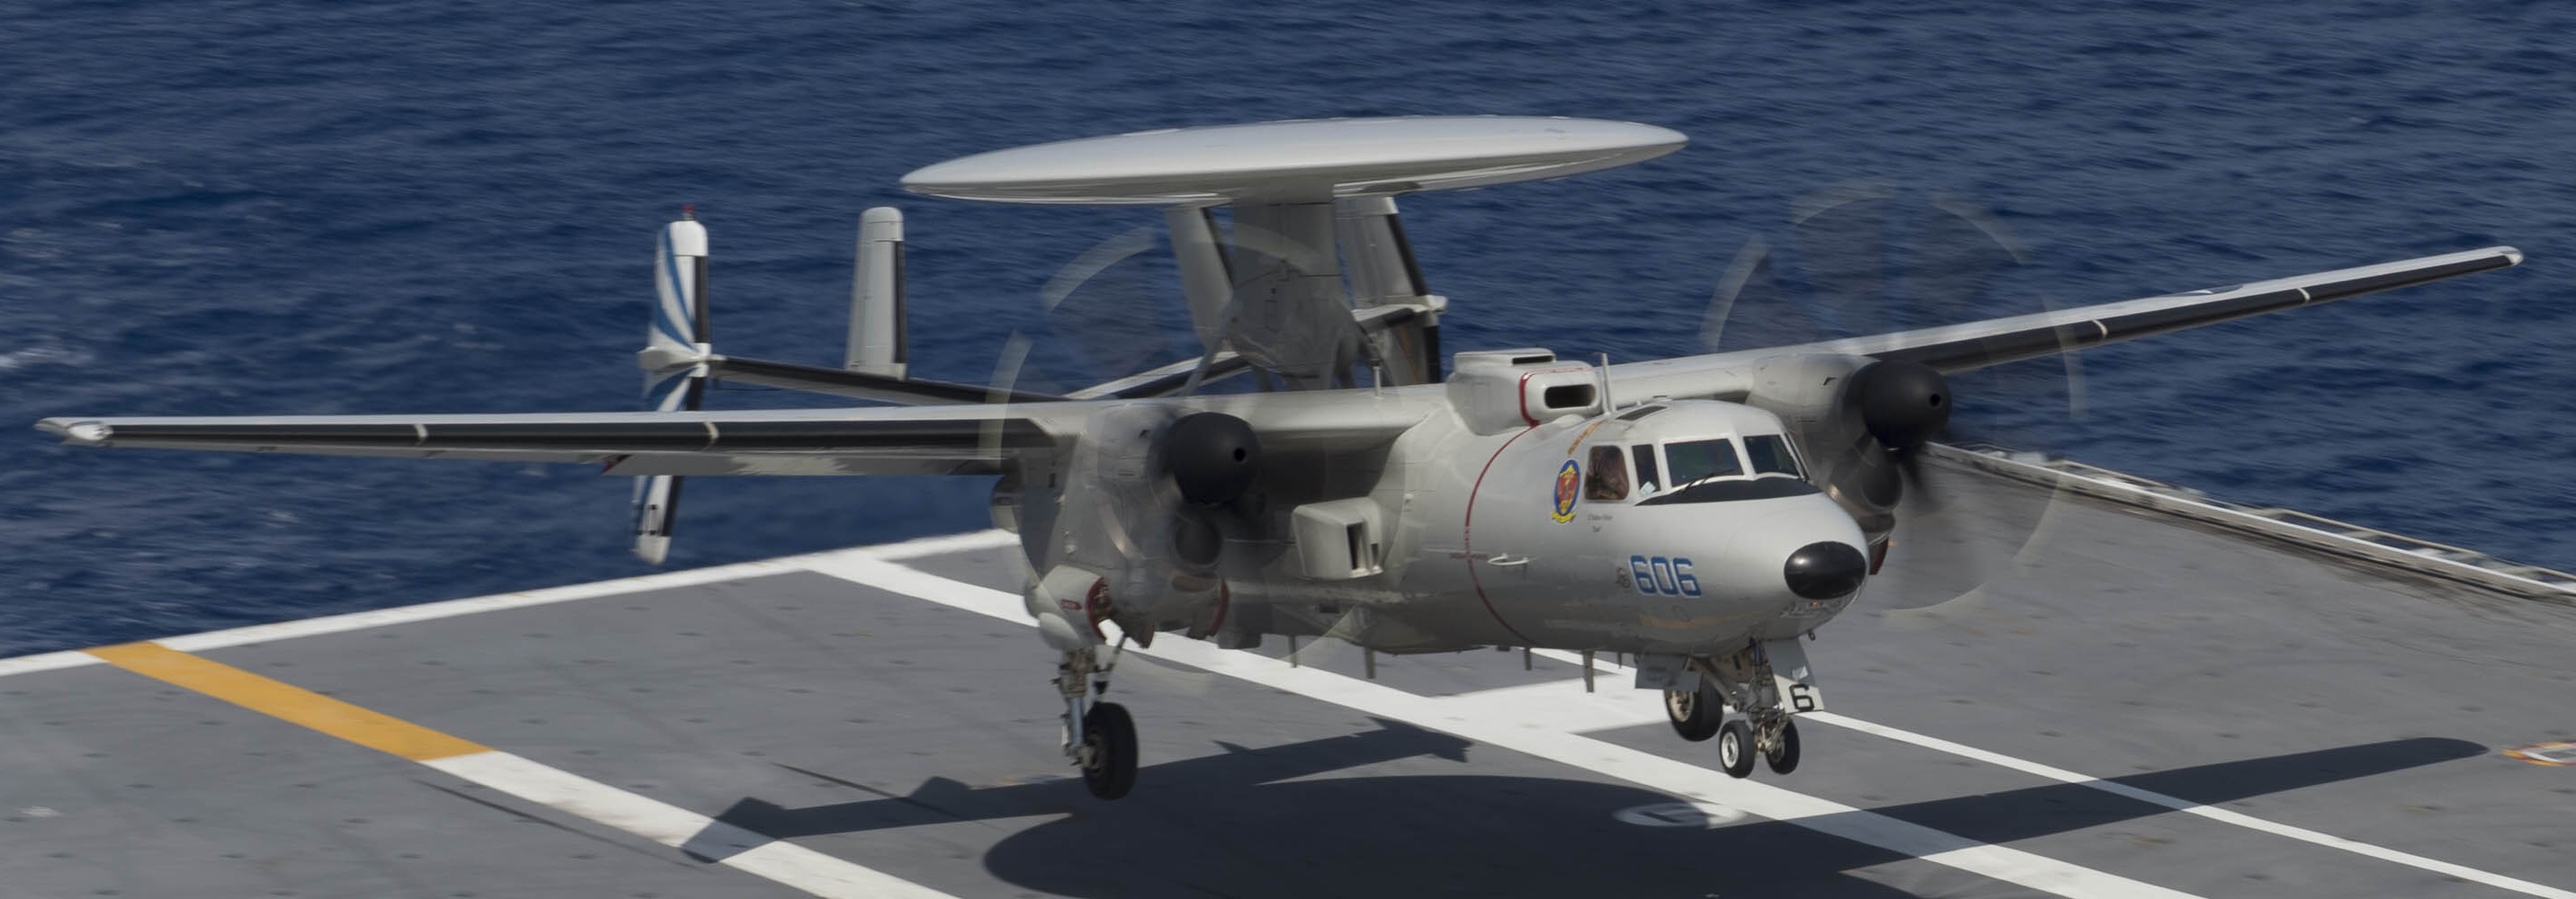 vaw-121 bluetails carrier airborne early warning squadron us navy e-2d advanced hawkeye cvw-7 uss abraham lincoln cvn-72 49